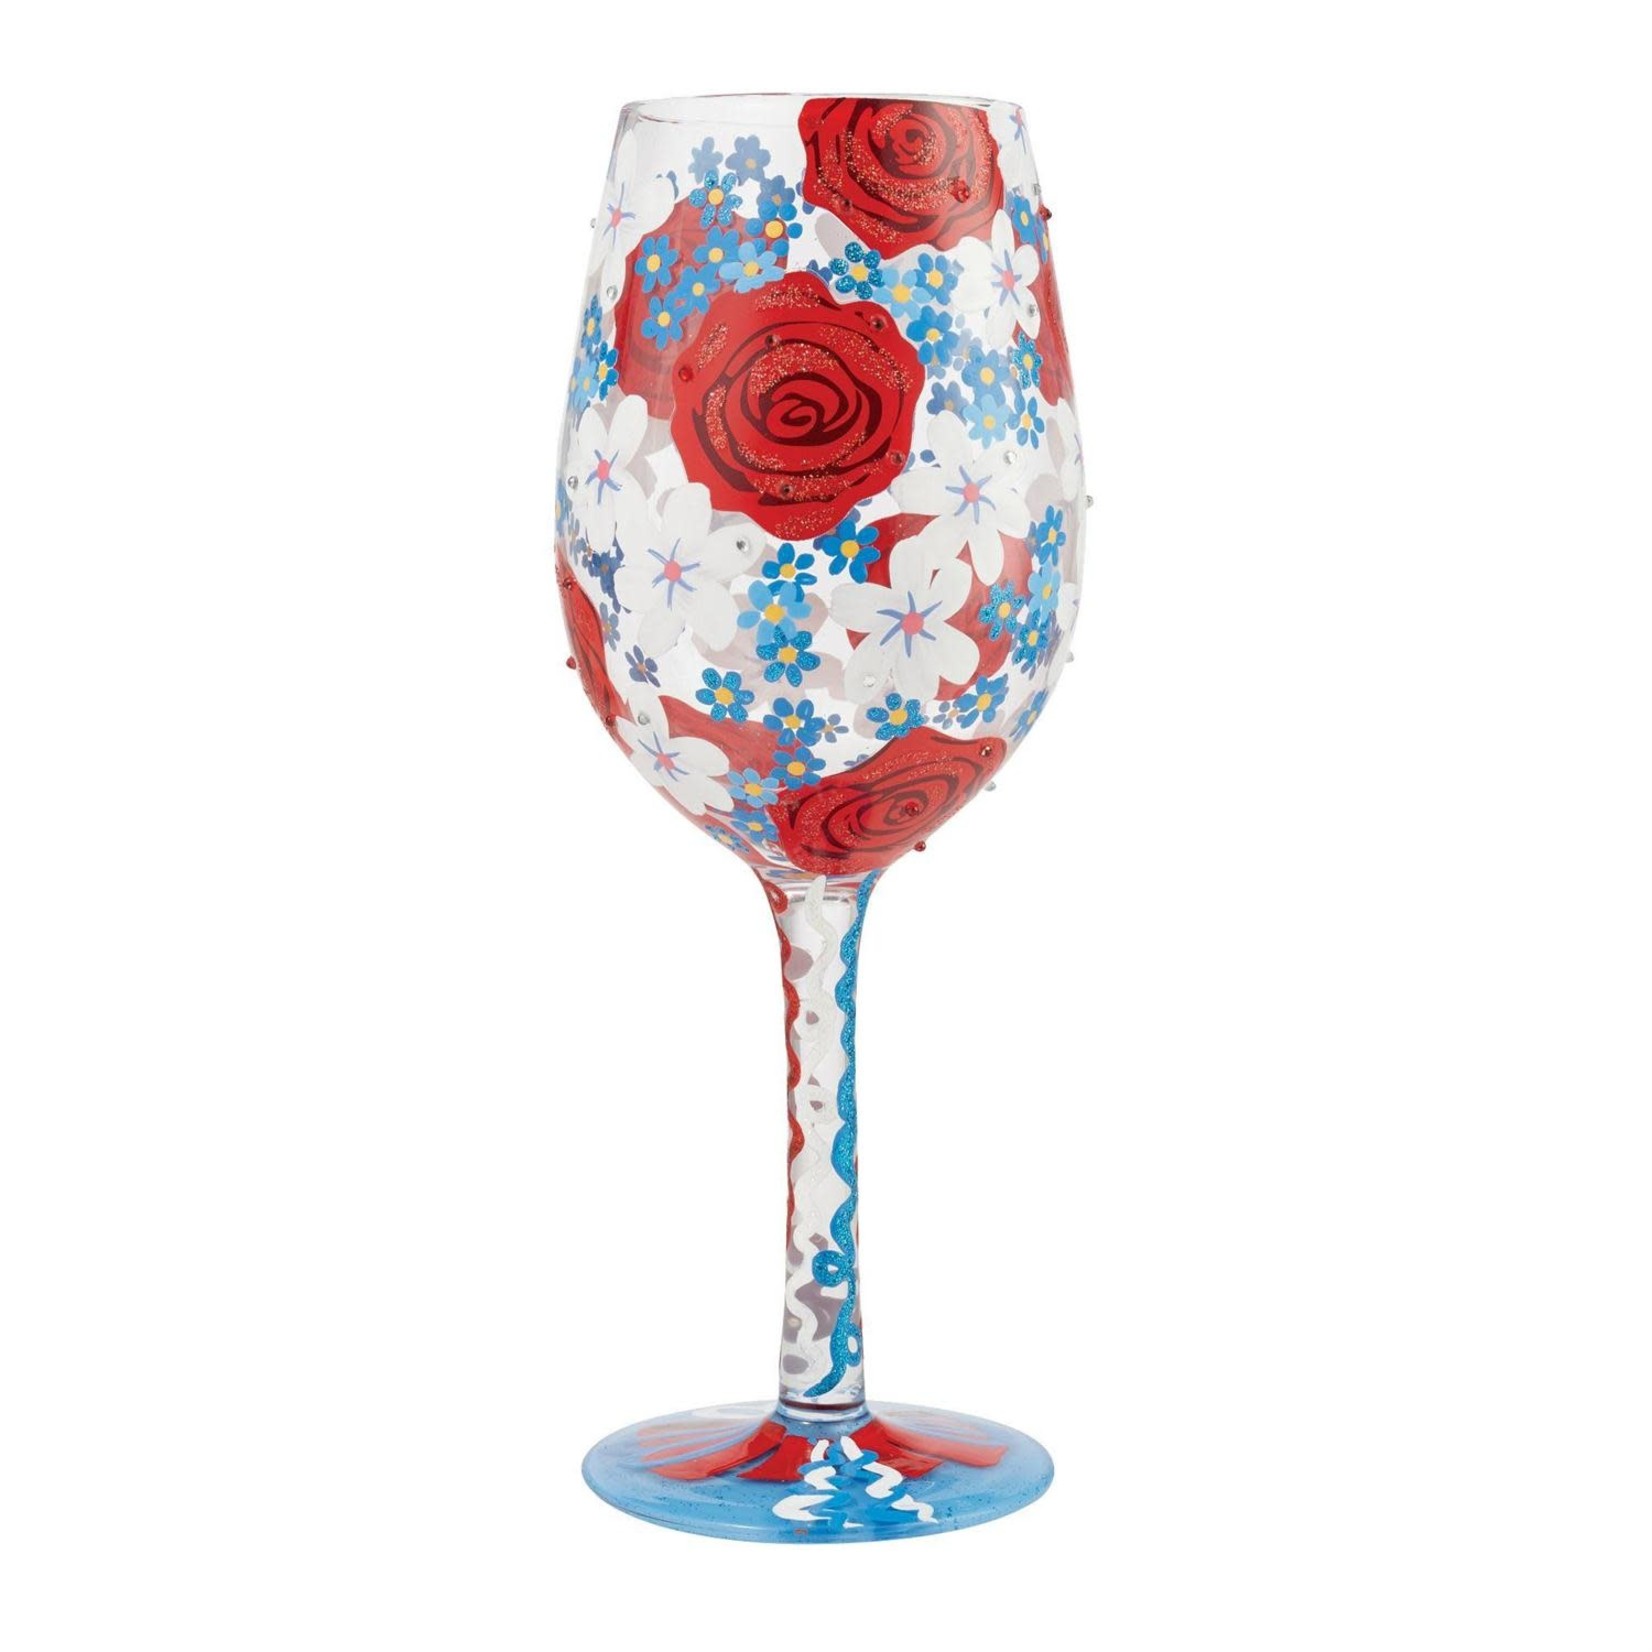 Lolita Wine Glass - Red, White and Bloomed